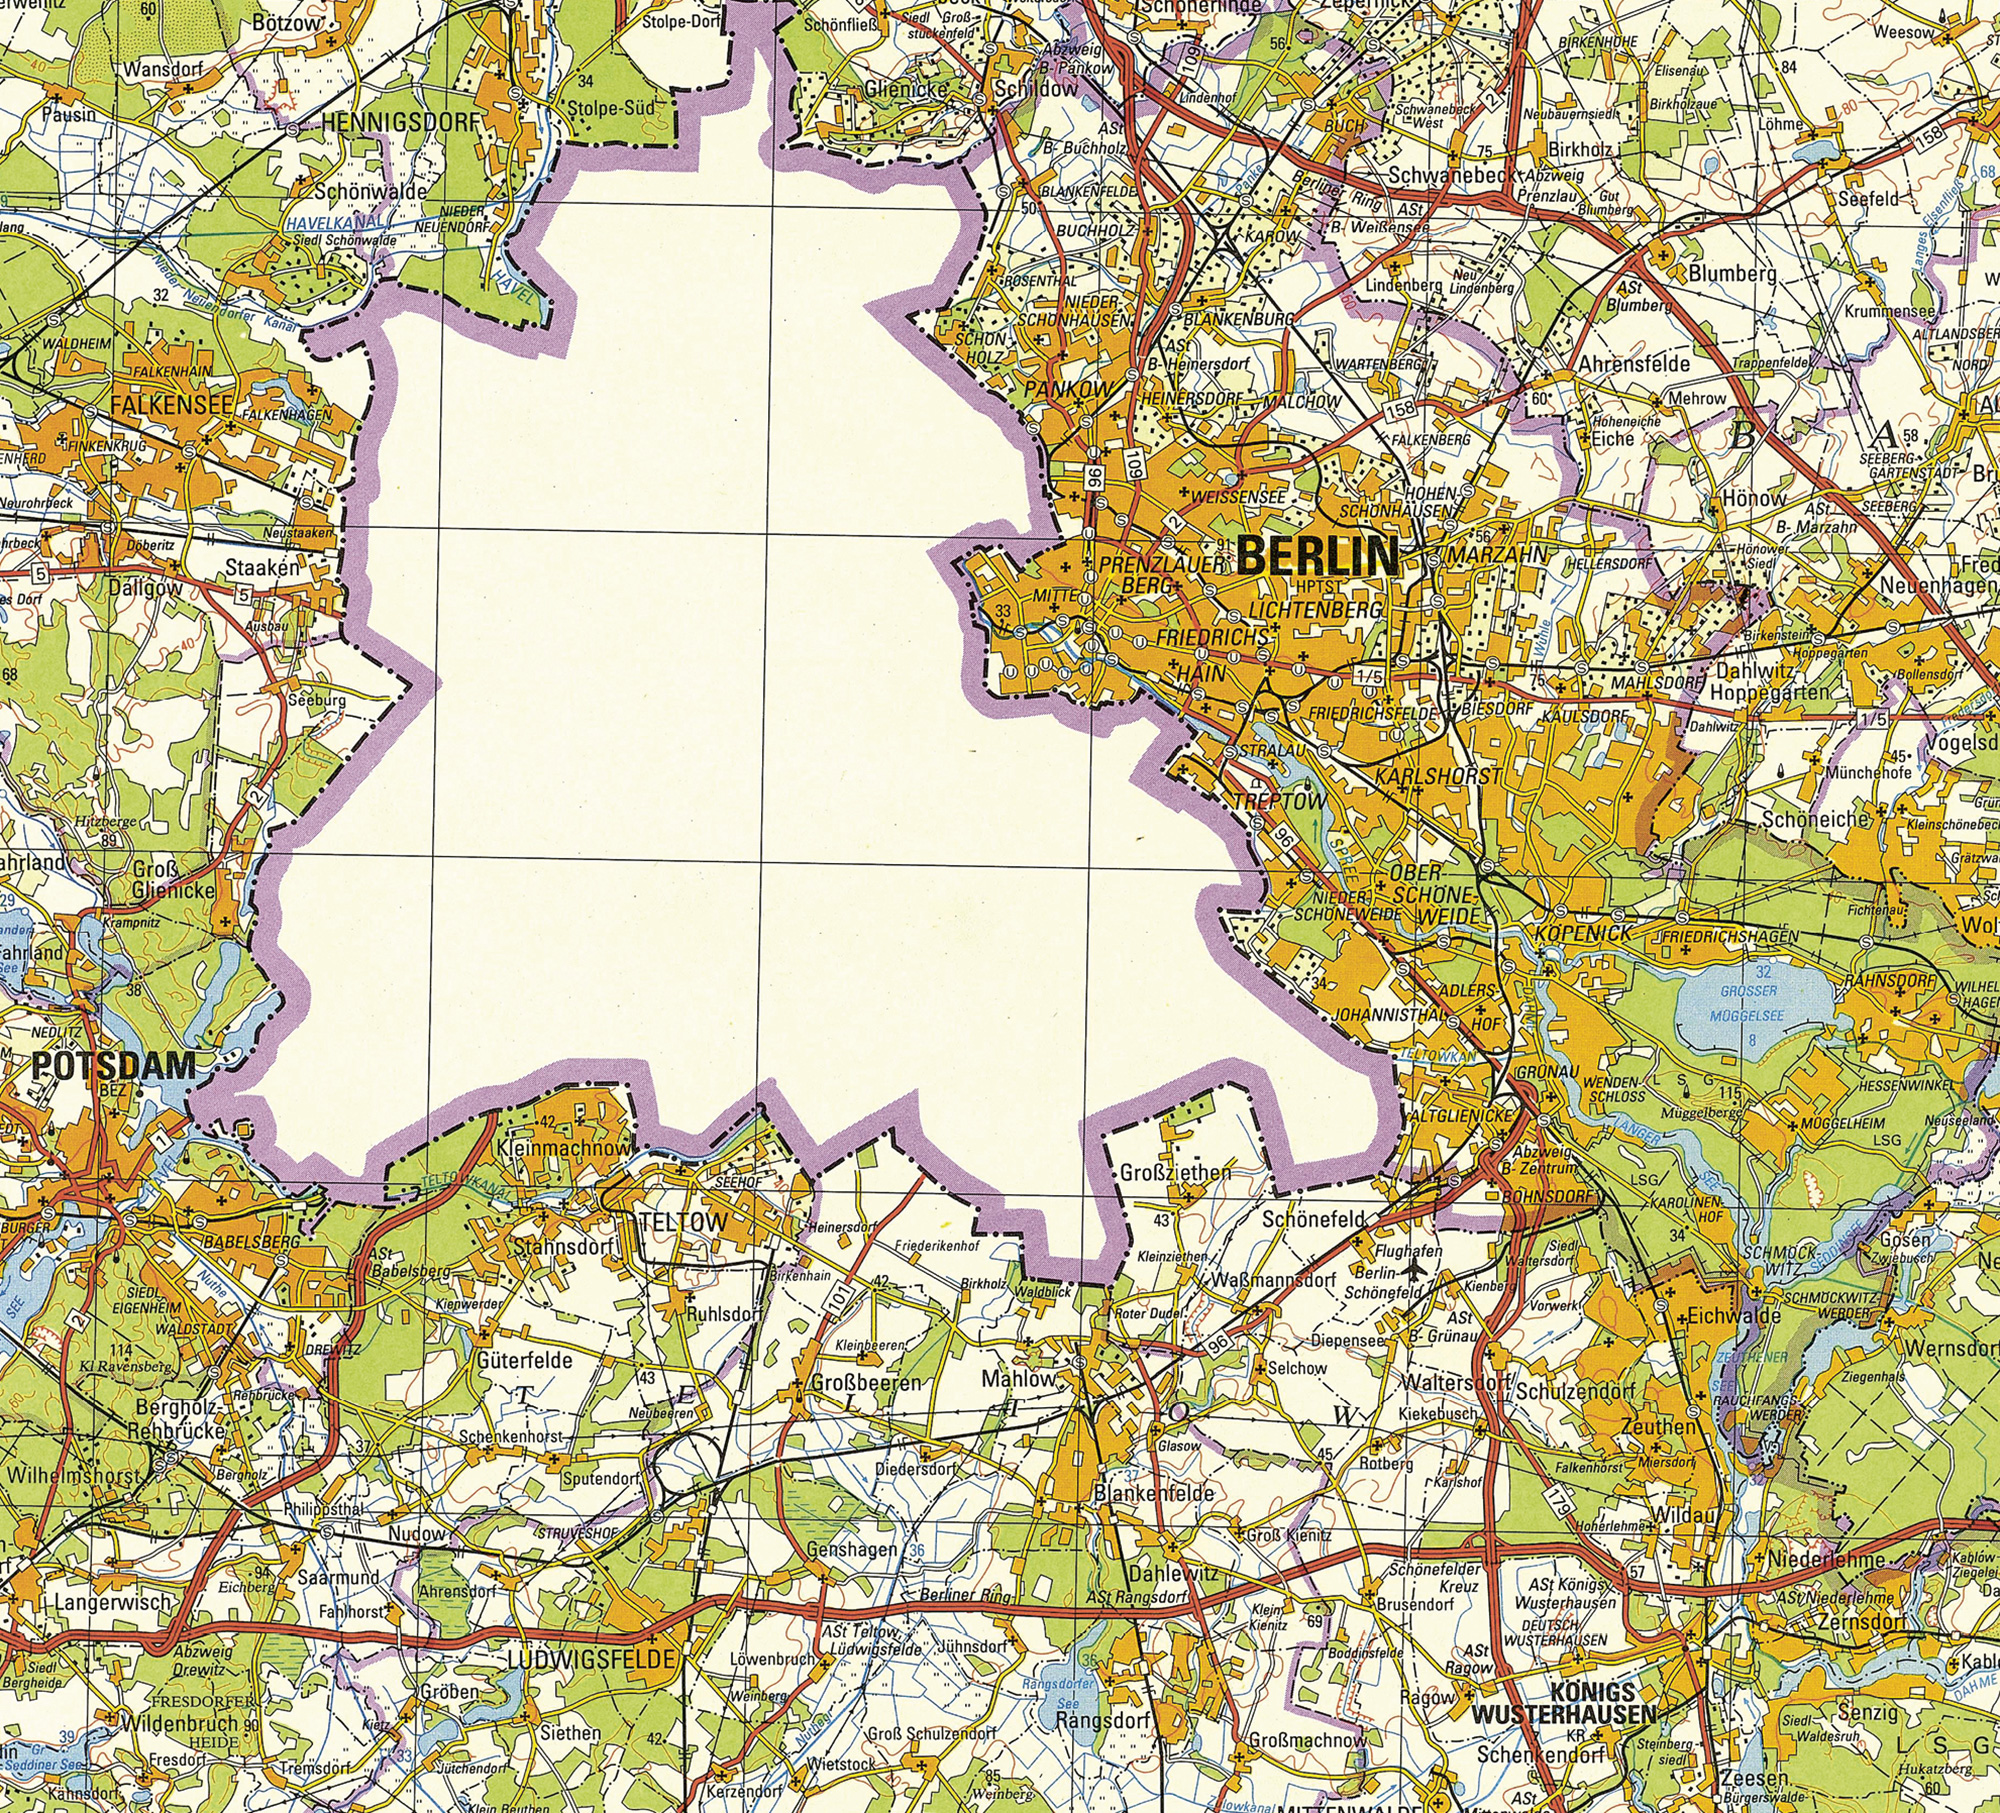 A nineteen eighty-eight East German map which shows an empty void in the place of West Berlin.